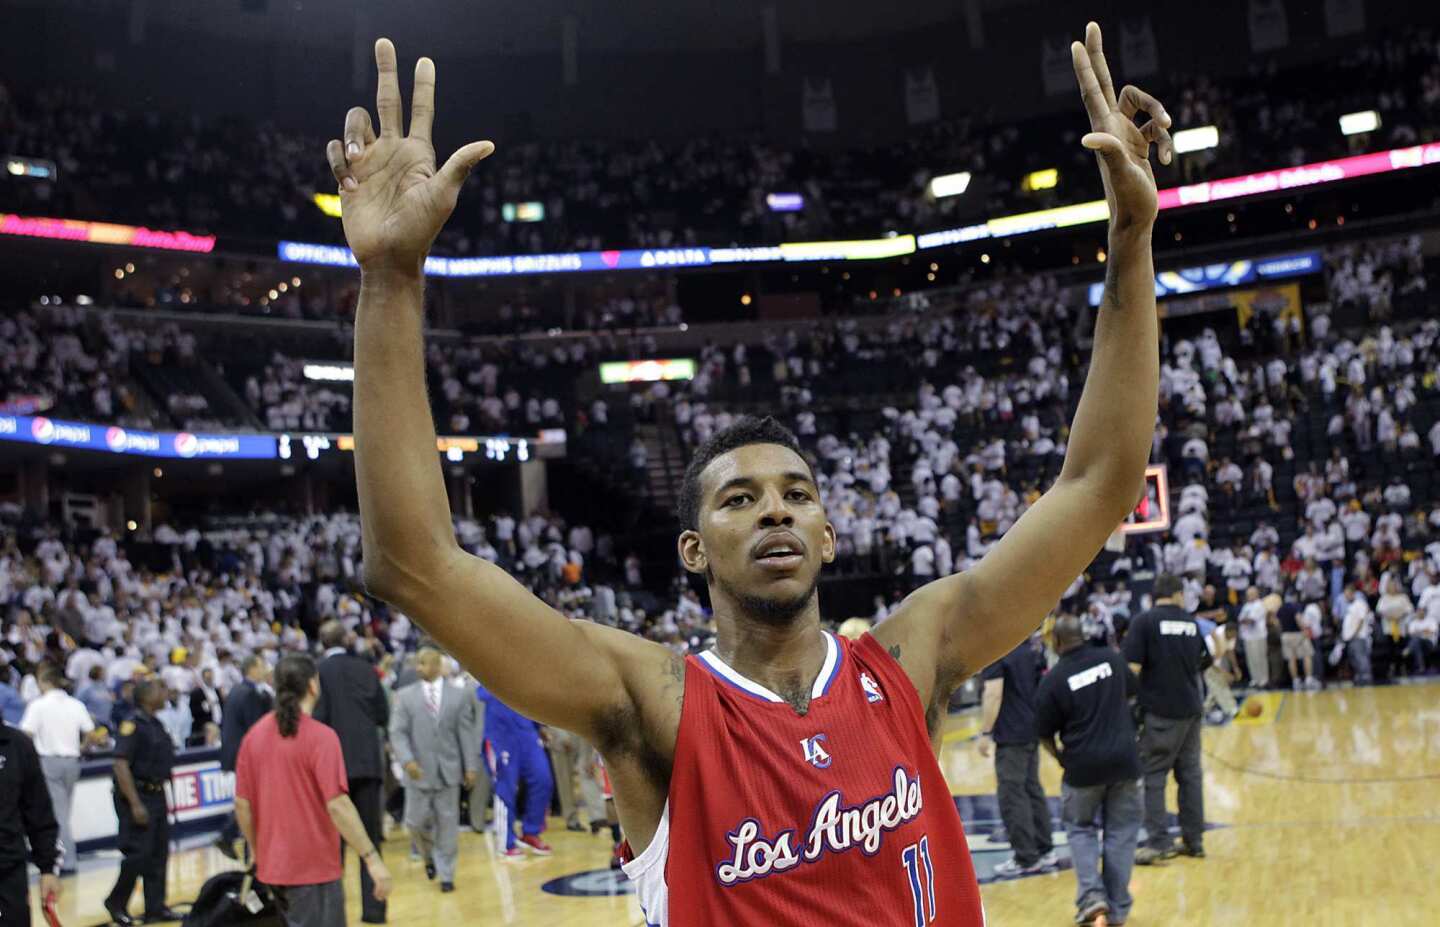 Guard Nick Young celebrates after the Clippers upset the Grizzlies, 82-72, in Game 7 of their first-round playoff series on Sunday afternoon in Memphis.